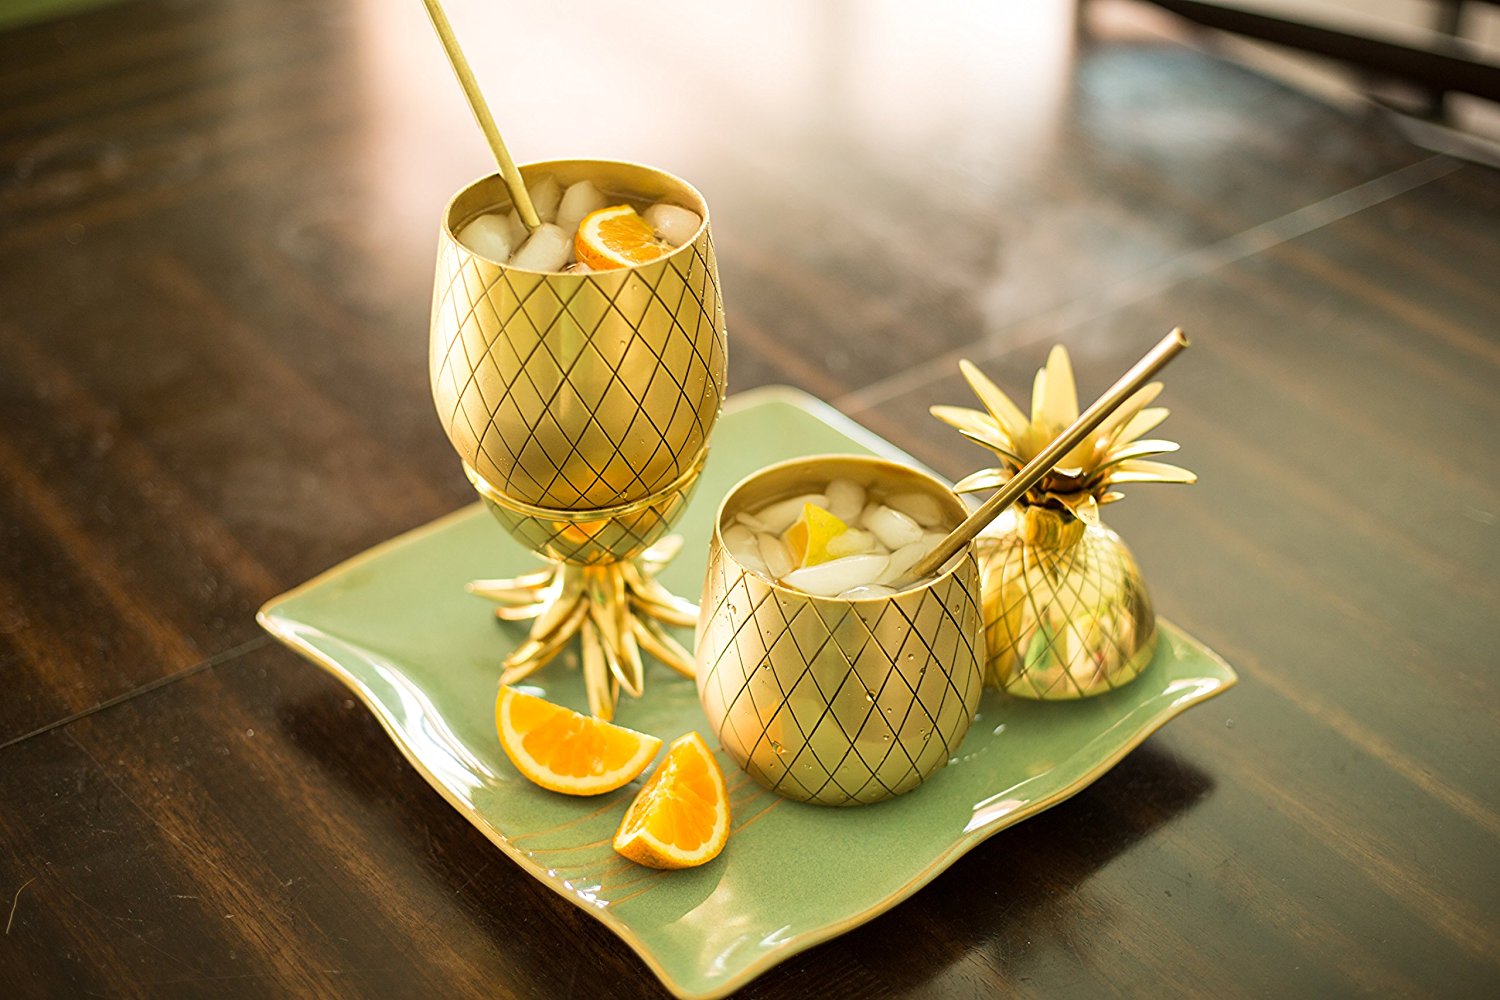 pineapple tumbler wholesales china, pineapple cup manufacturer china